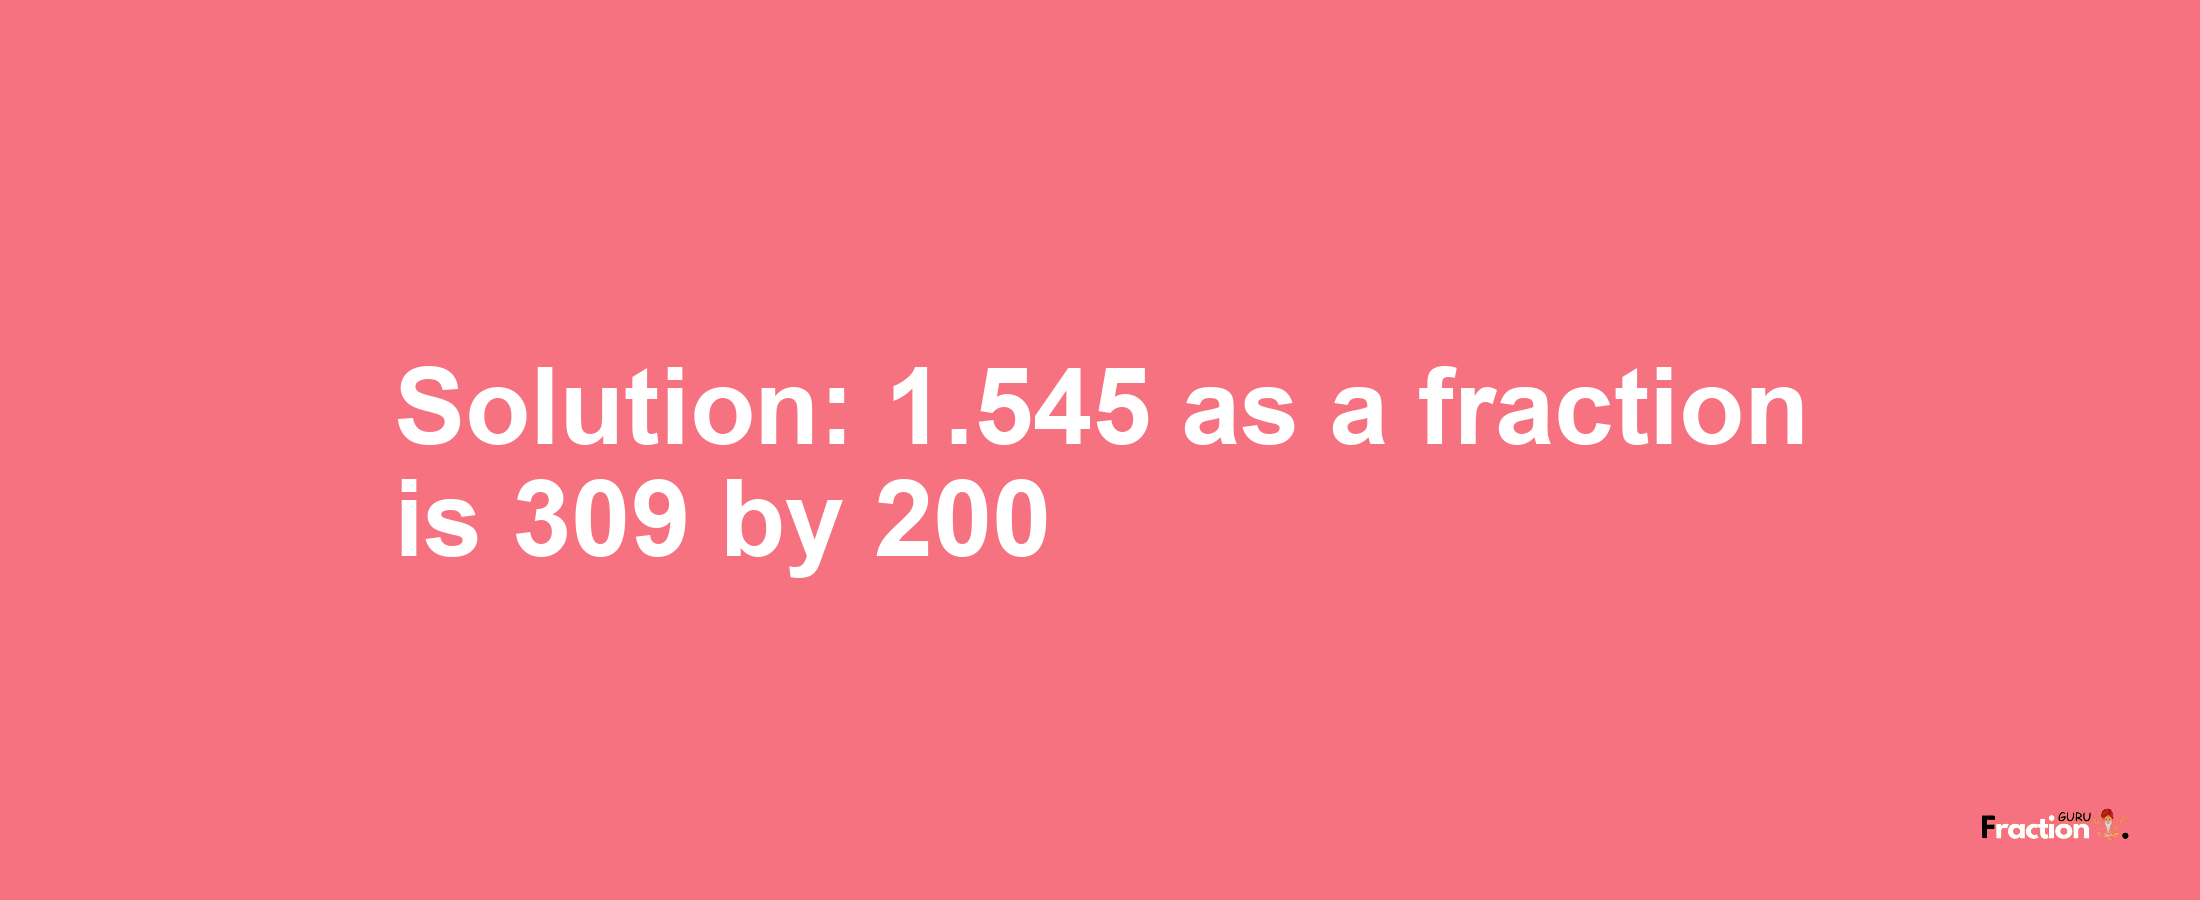 Solution:1.545 as a fraction is 309/200